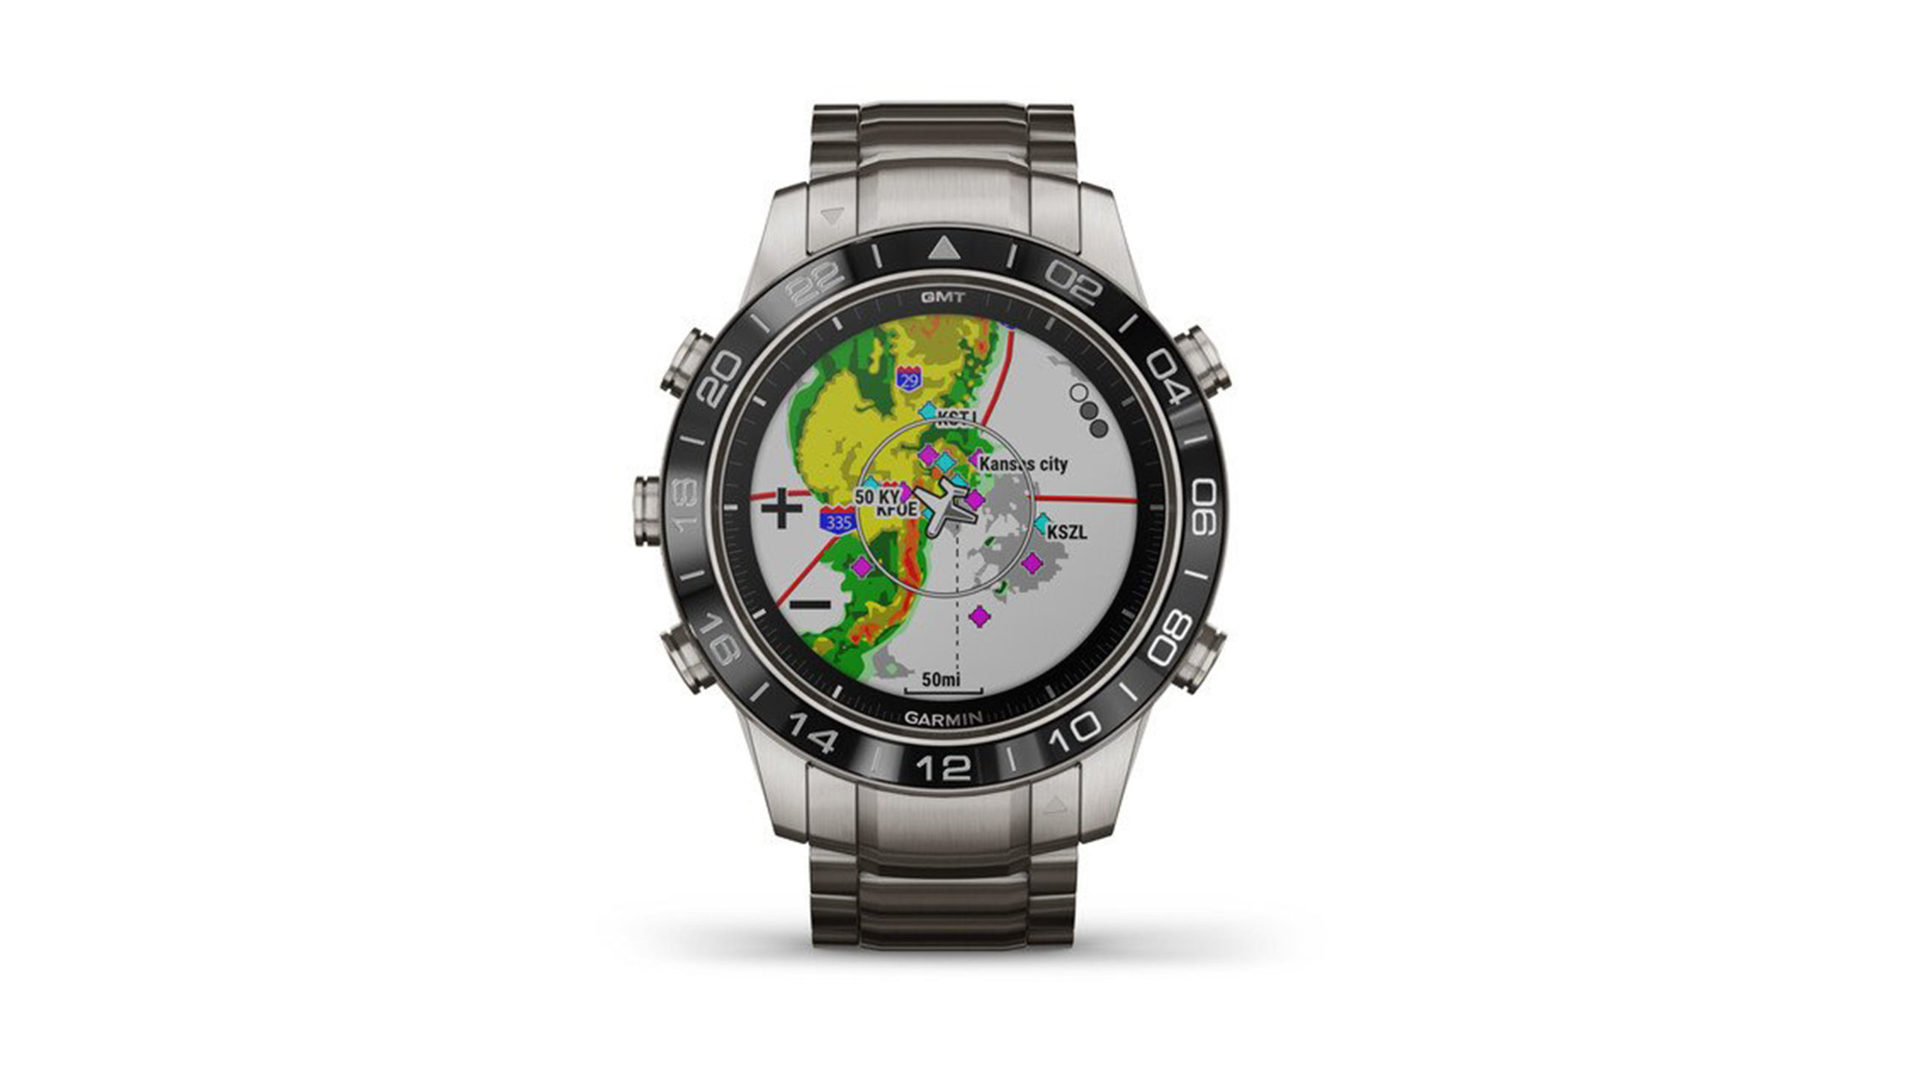 The Garmin Marq Aviator highlights one of the device's navigational tools.